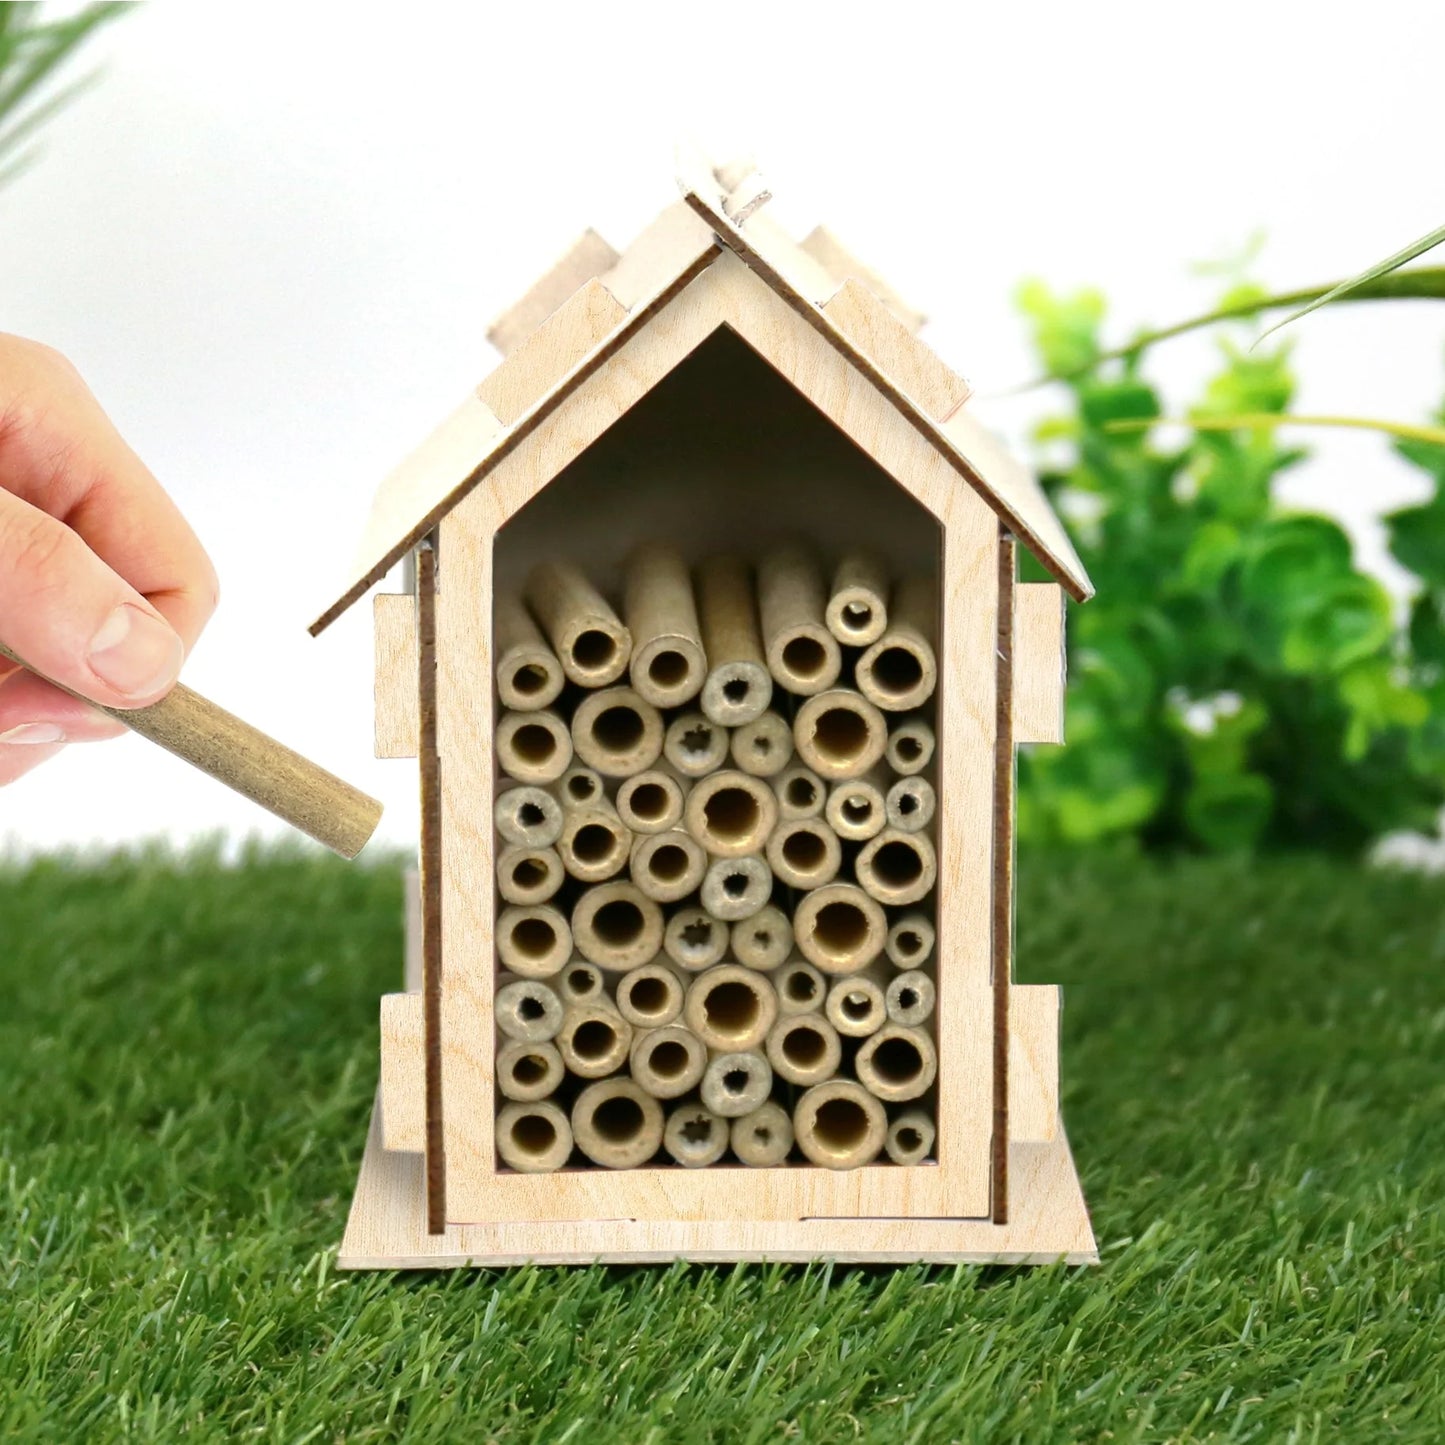 Bee Hotel Kit - Build A Home For Bees To Live In - Buildable Habitat Kit - Mellow Monkey